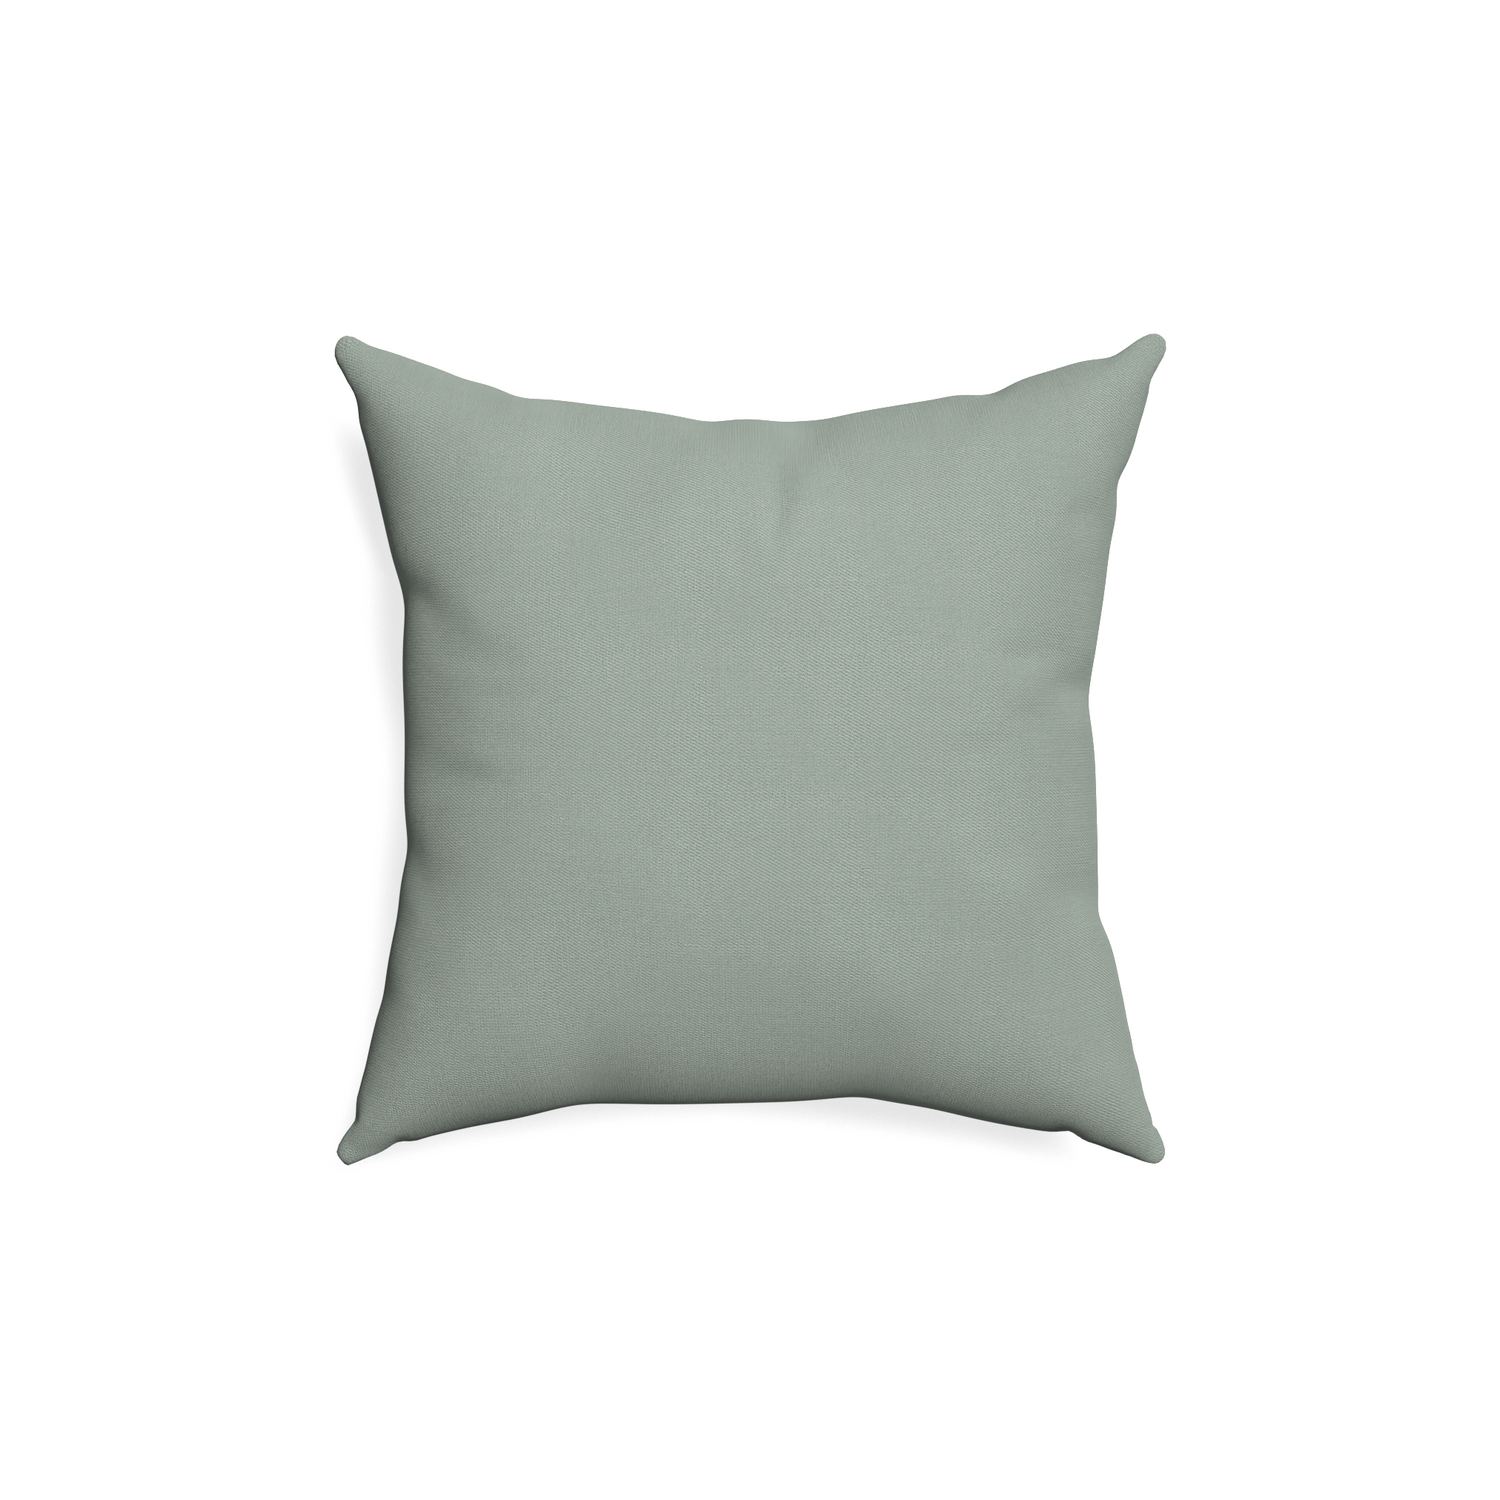 18-square sage custom sage green cottonpillow with none on white background